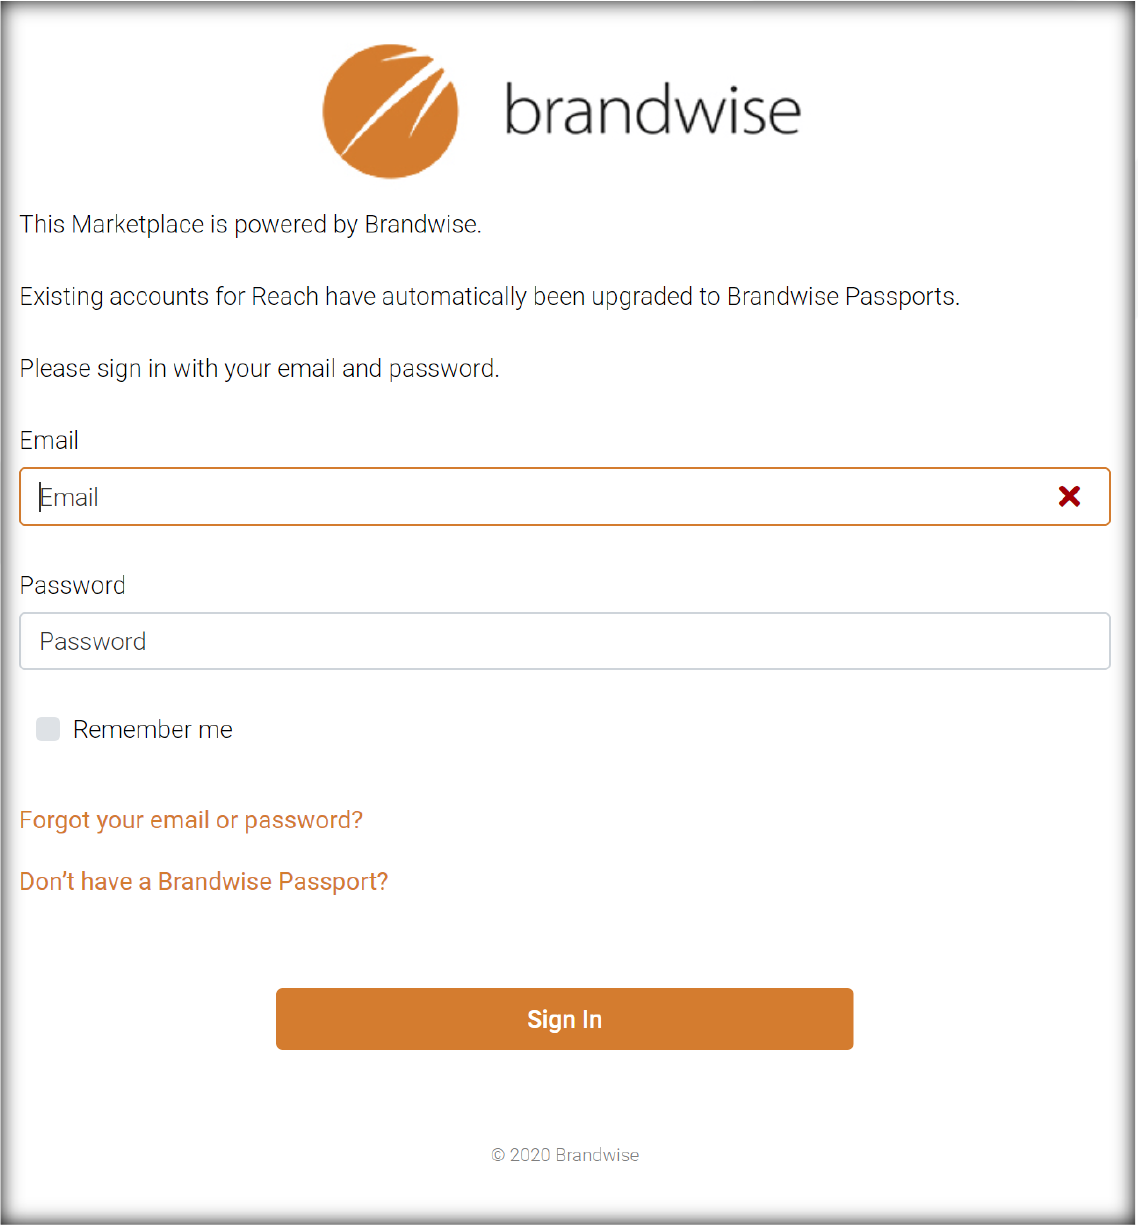 and! Sales Brandwise Passport Step by Step 1